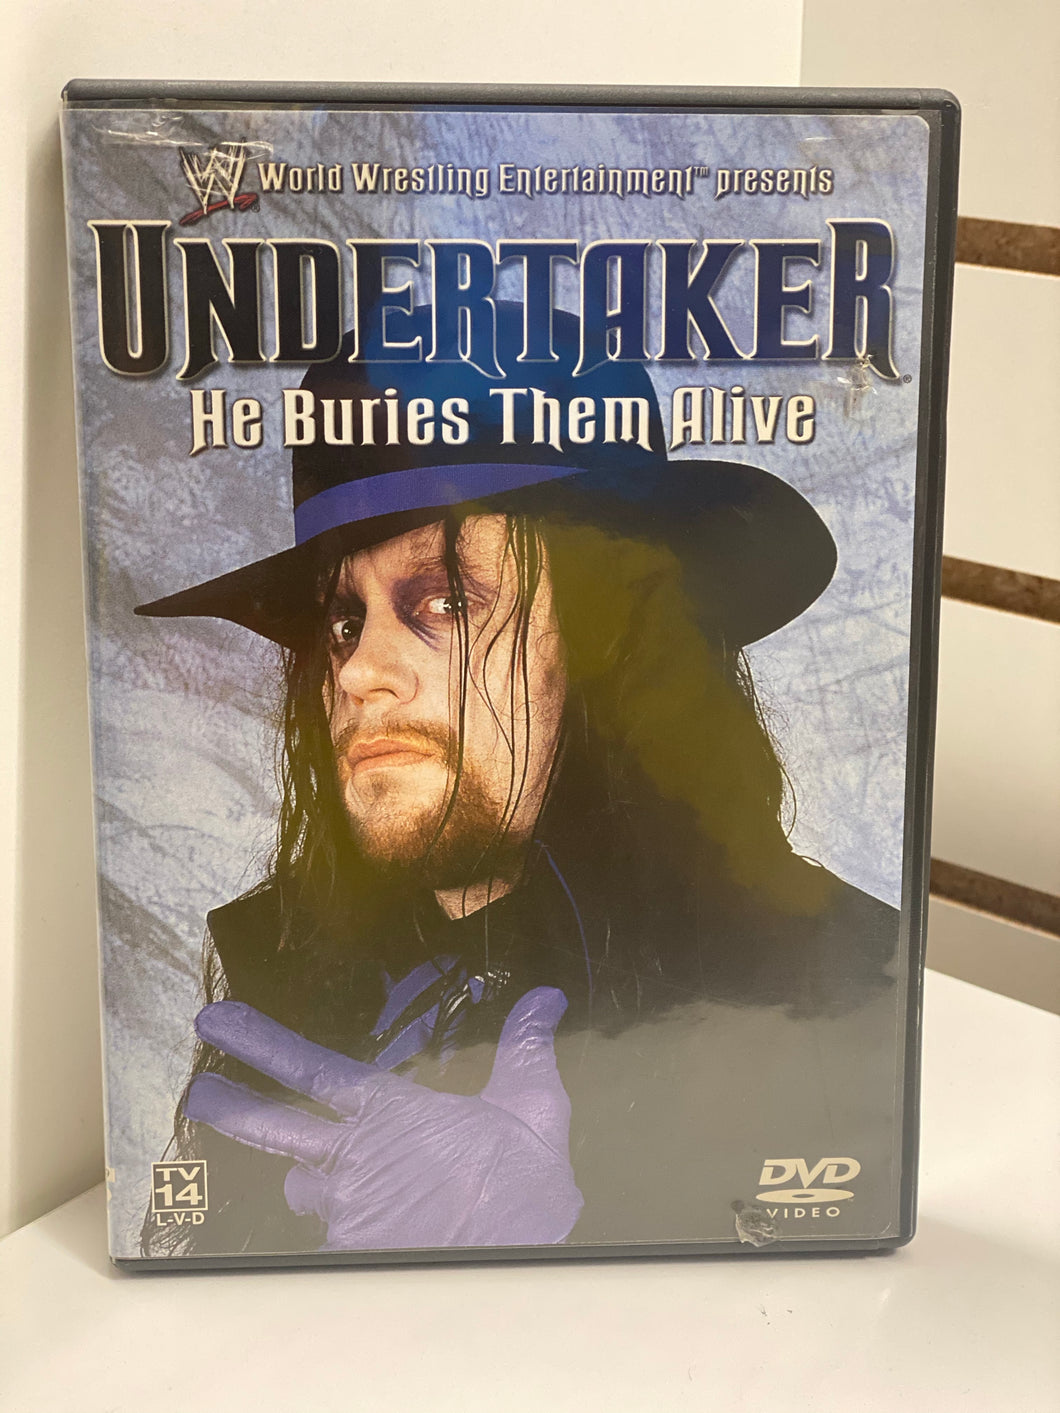 WWE The Undertaker. He buries them alive